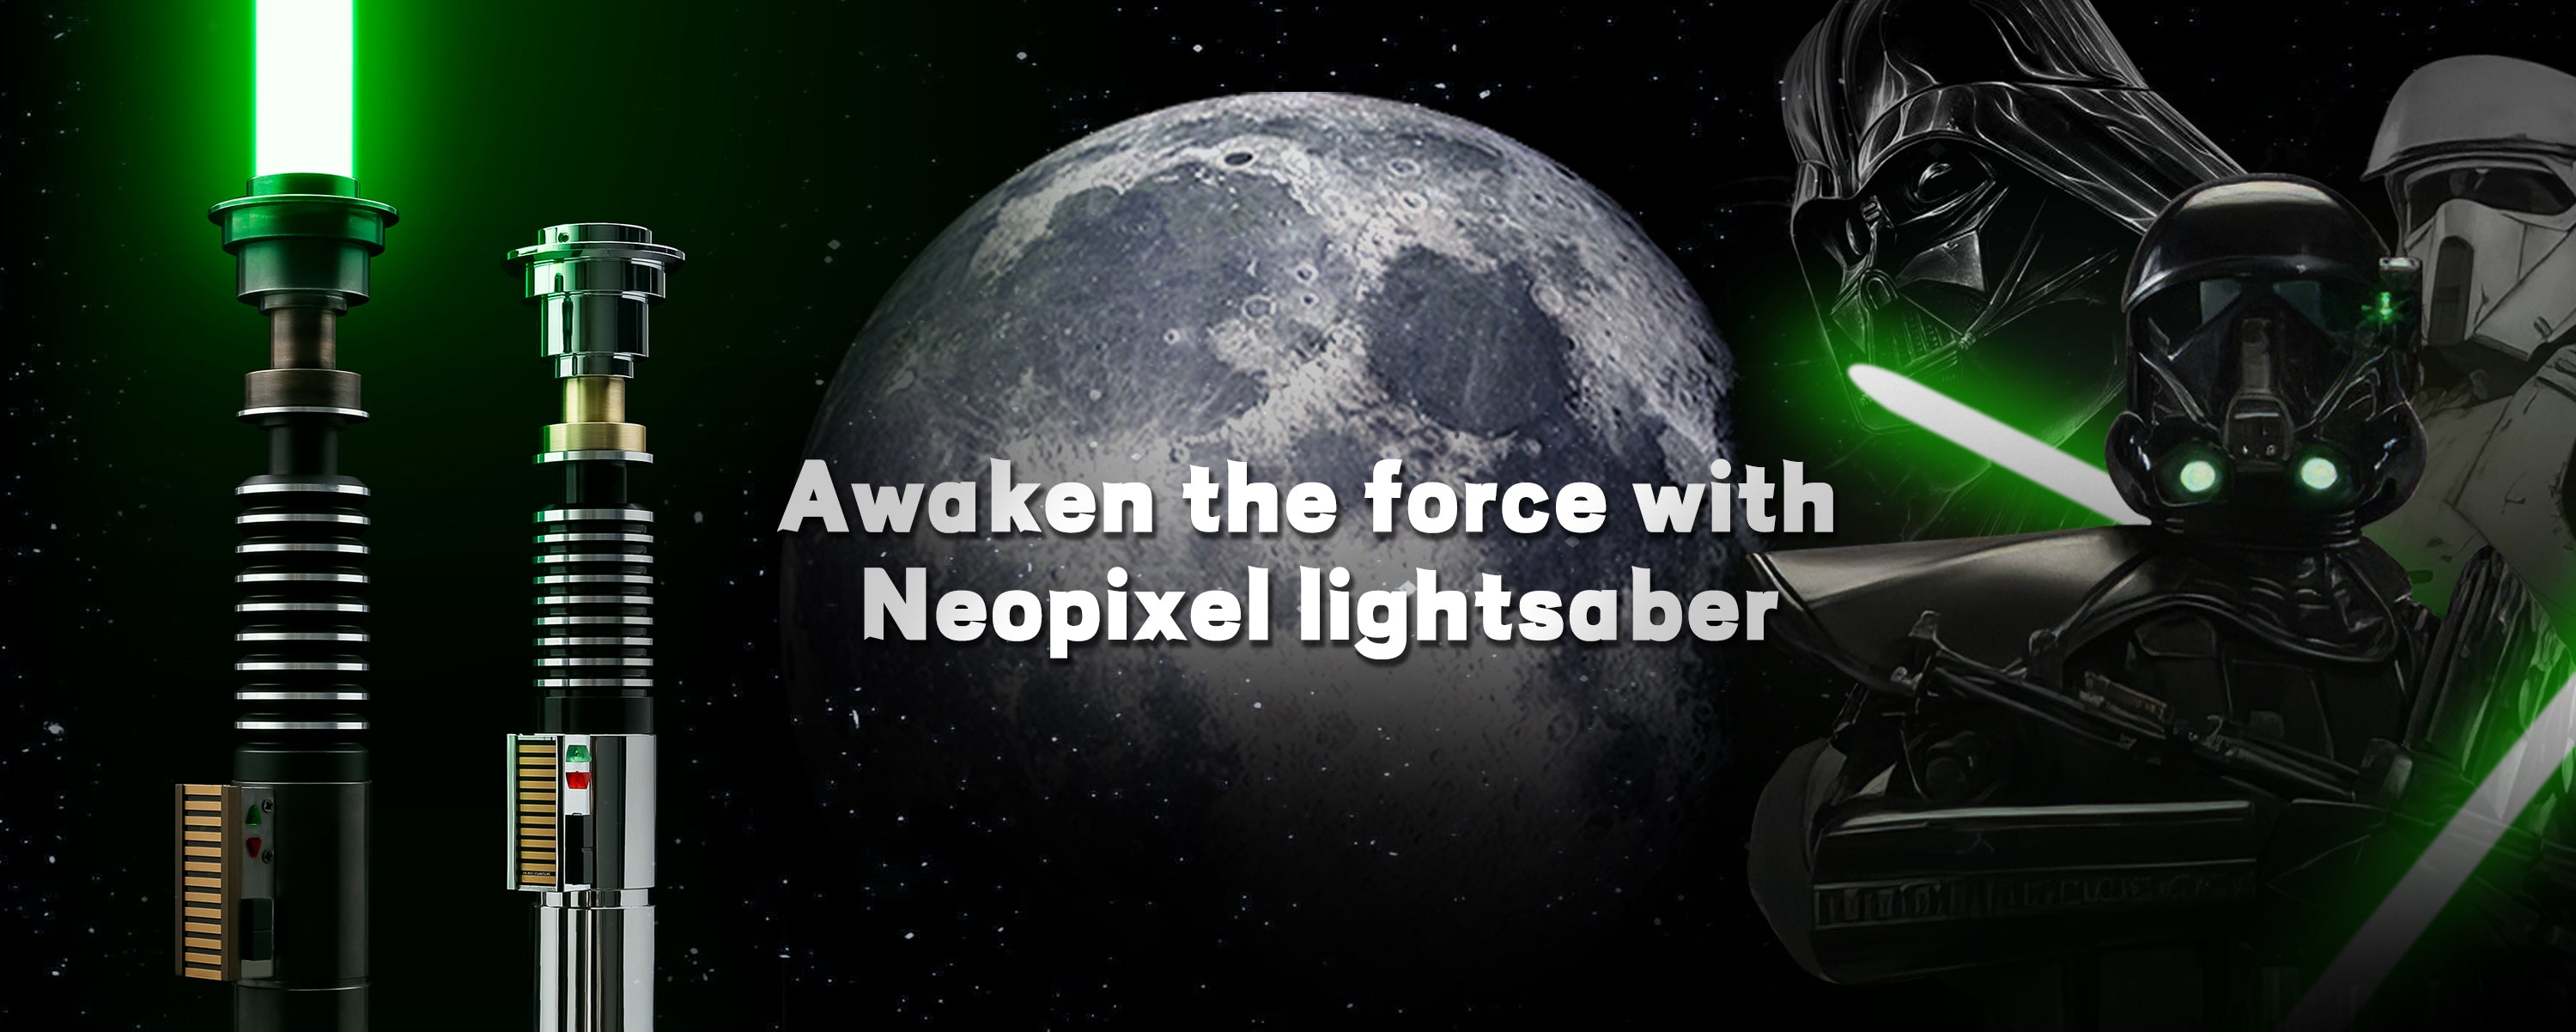 This collection of lightsabers is one of a kind, your one-of-a-kind piece of equipment that shines in every situation